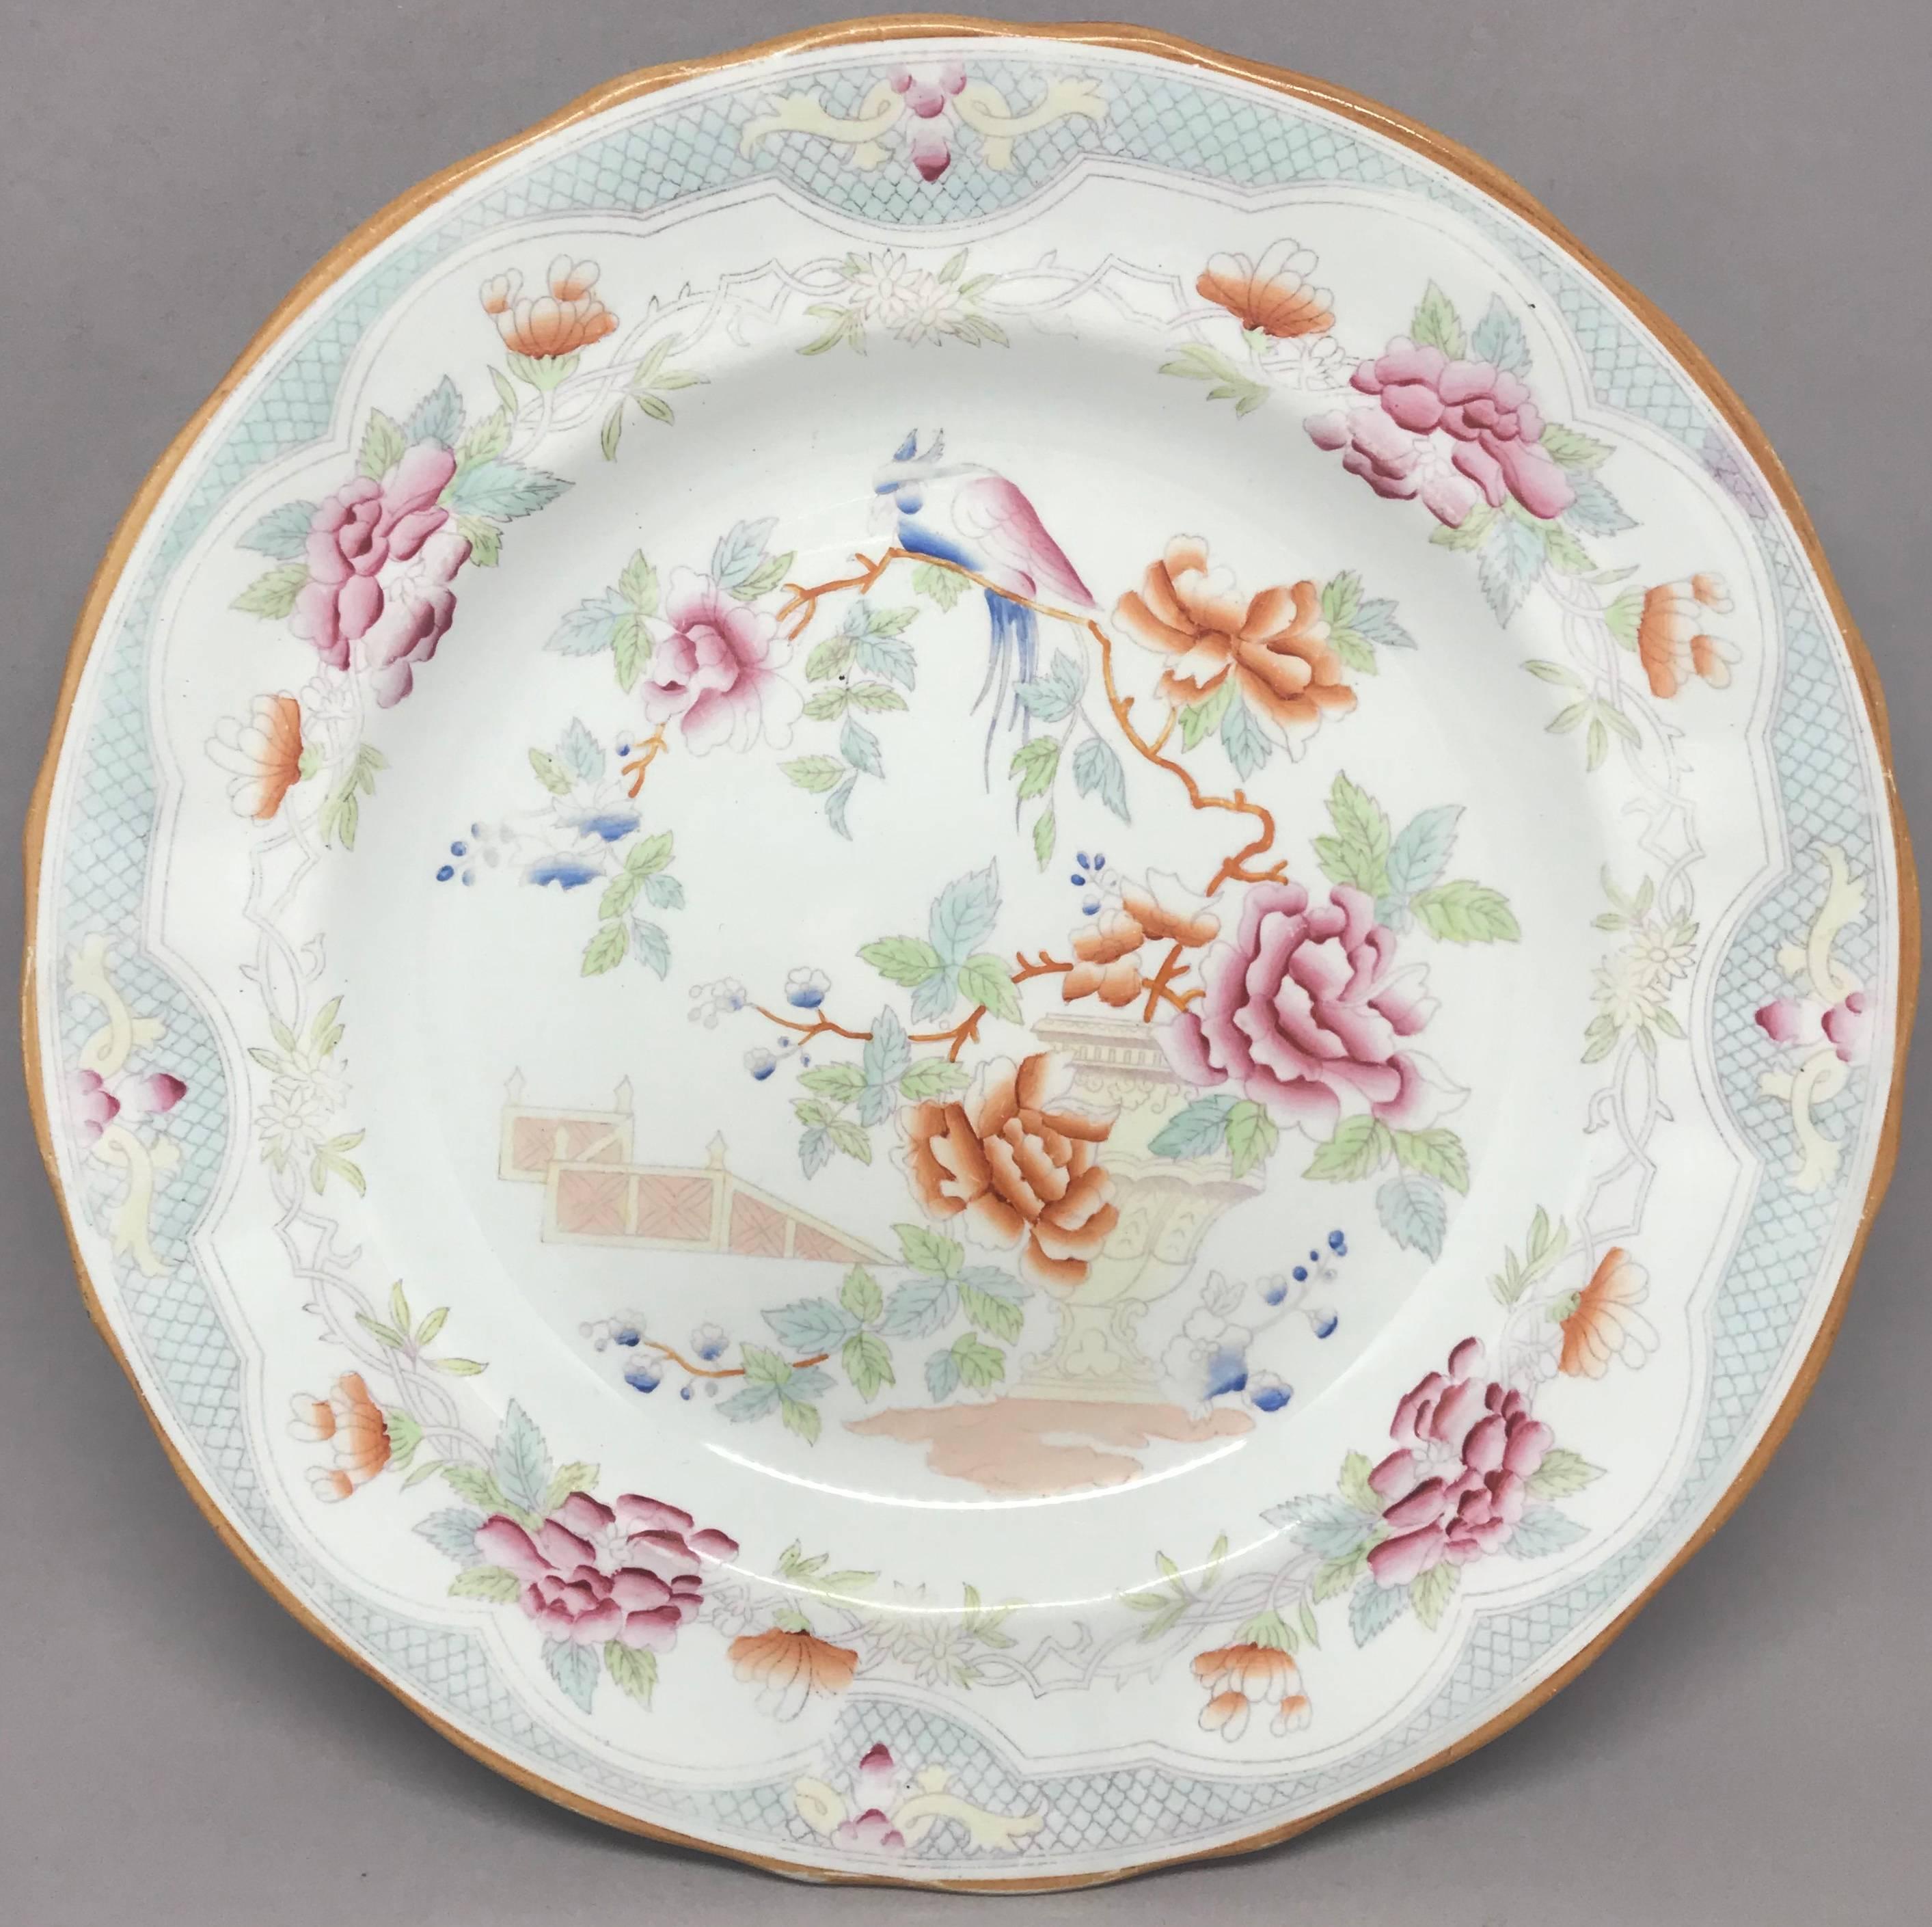 Dutch chinoiserie plate.  Antique orange rimmed Dutch chinoiserie floral plate with under glaze stamp for 